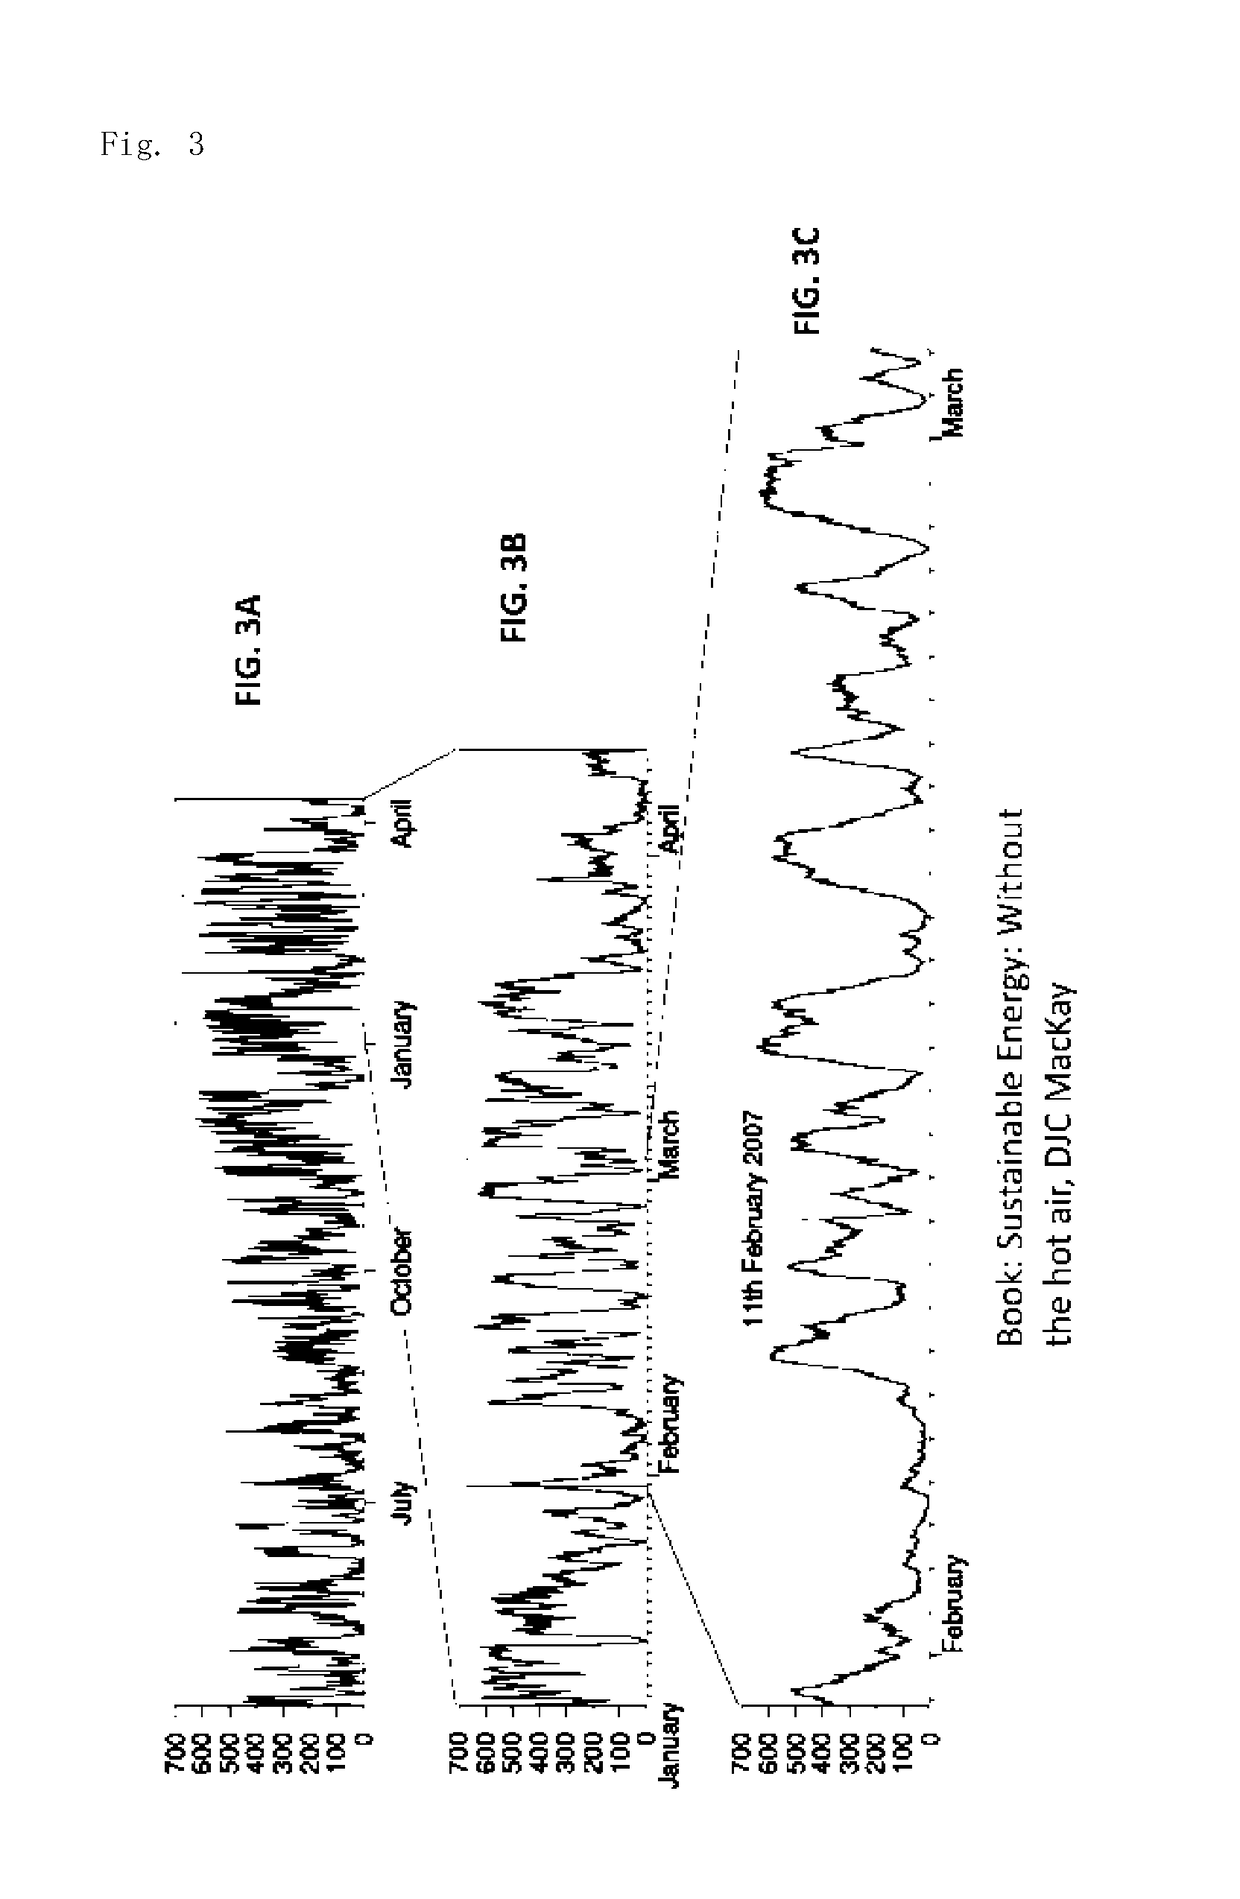 System and method of determining forecast error for renewable energy fluctuations